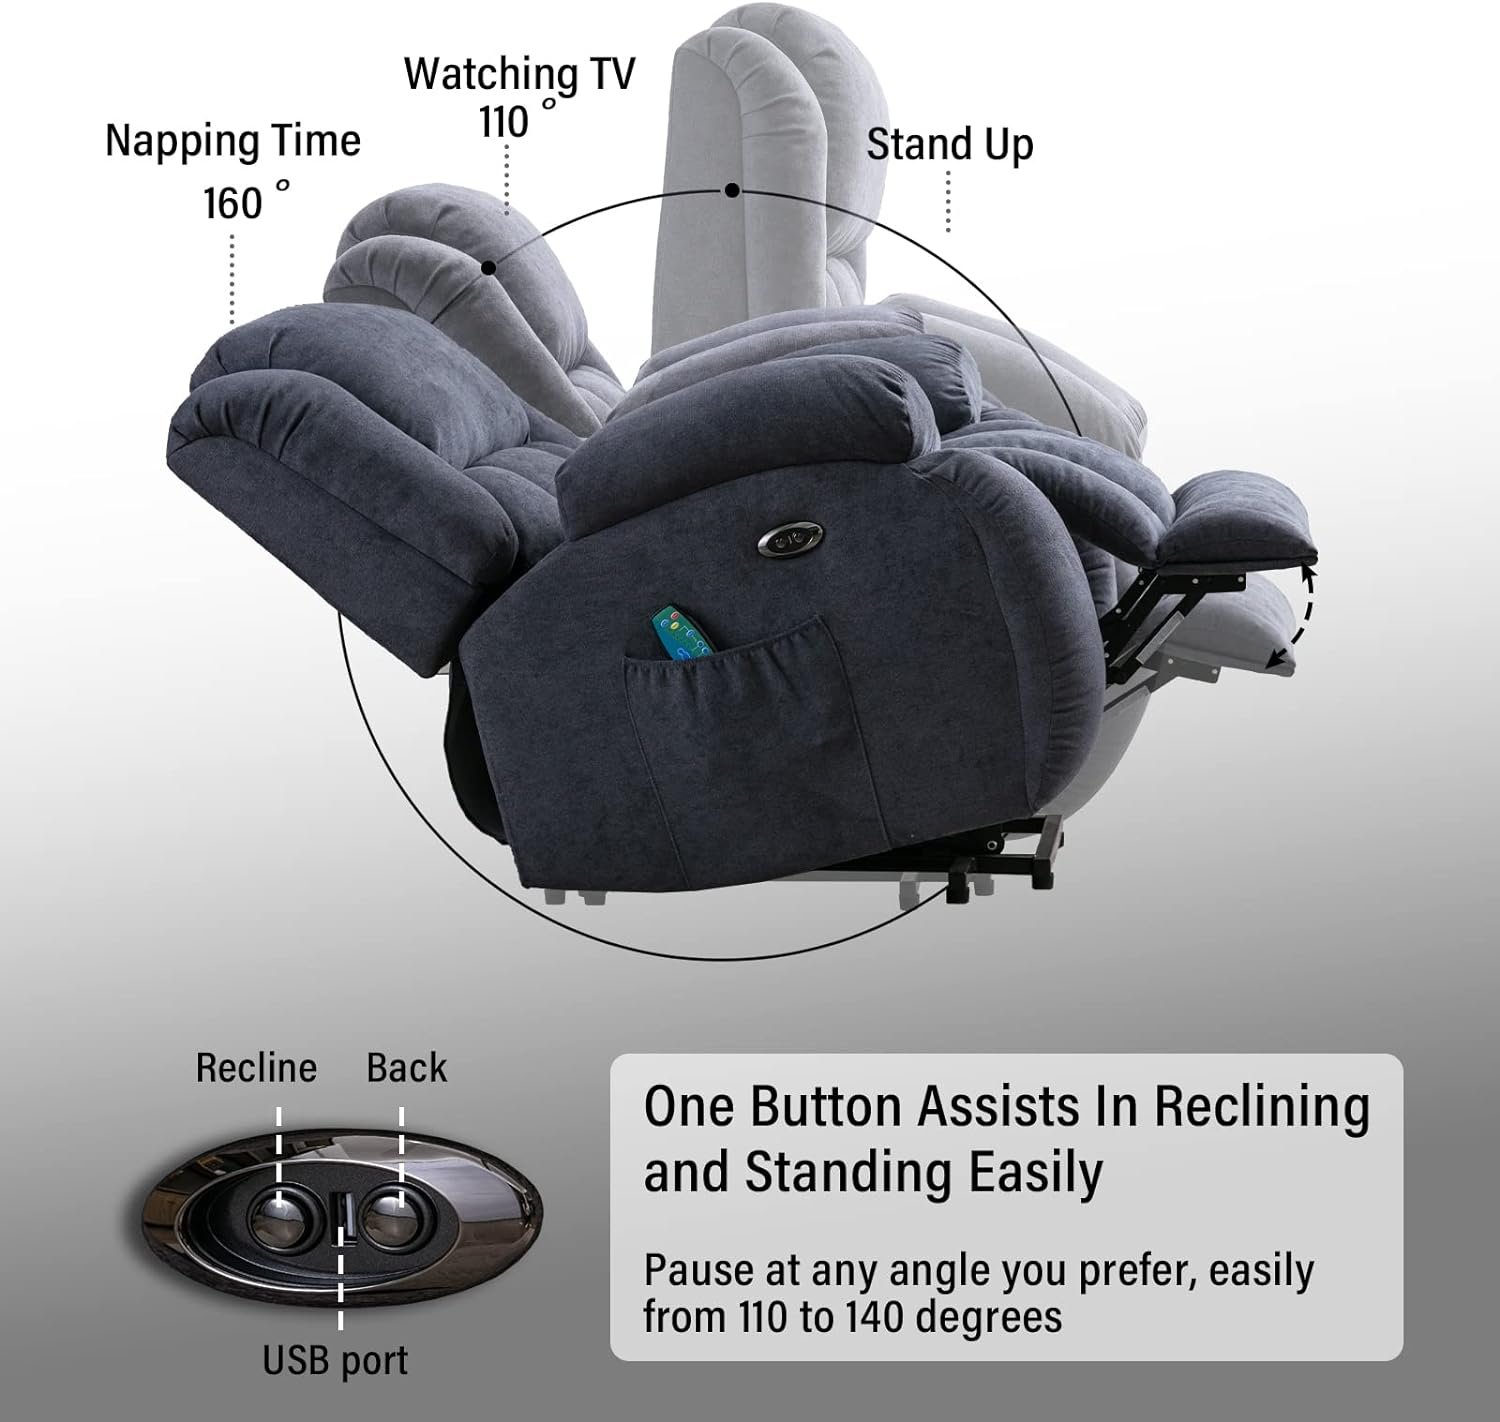 Dreamsir Electric Power Lift Recliner Chair, Fabric Oversized Lift Chair with Massage and Heat for Elderly, Modern Single Sofa Home Theater Seat, USB Ports, Grey